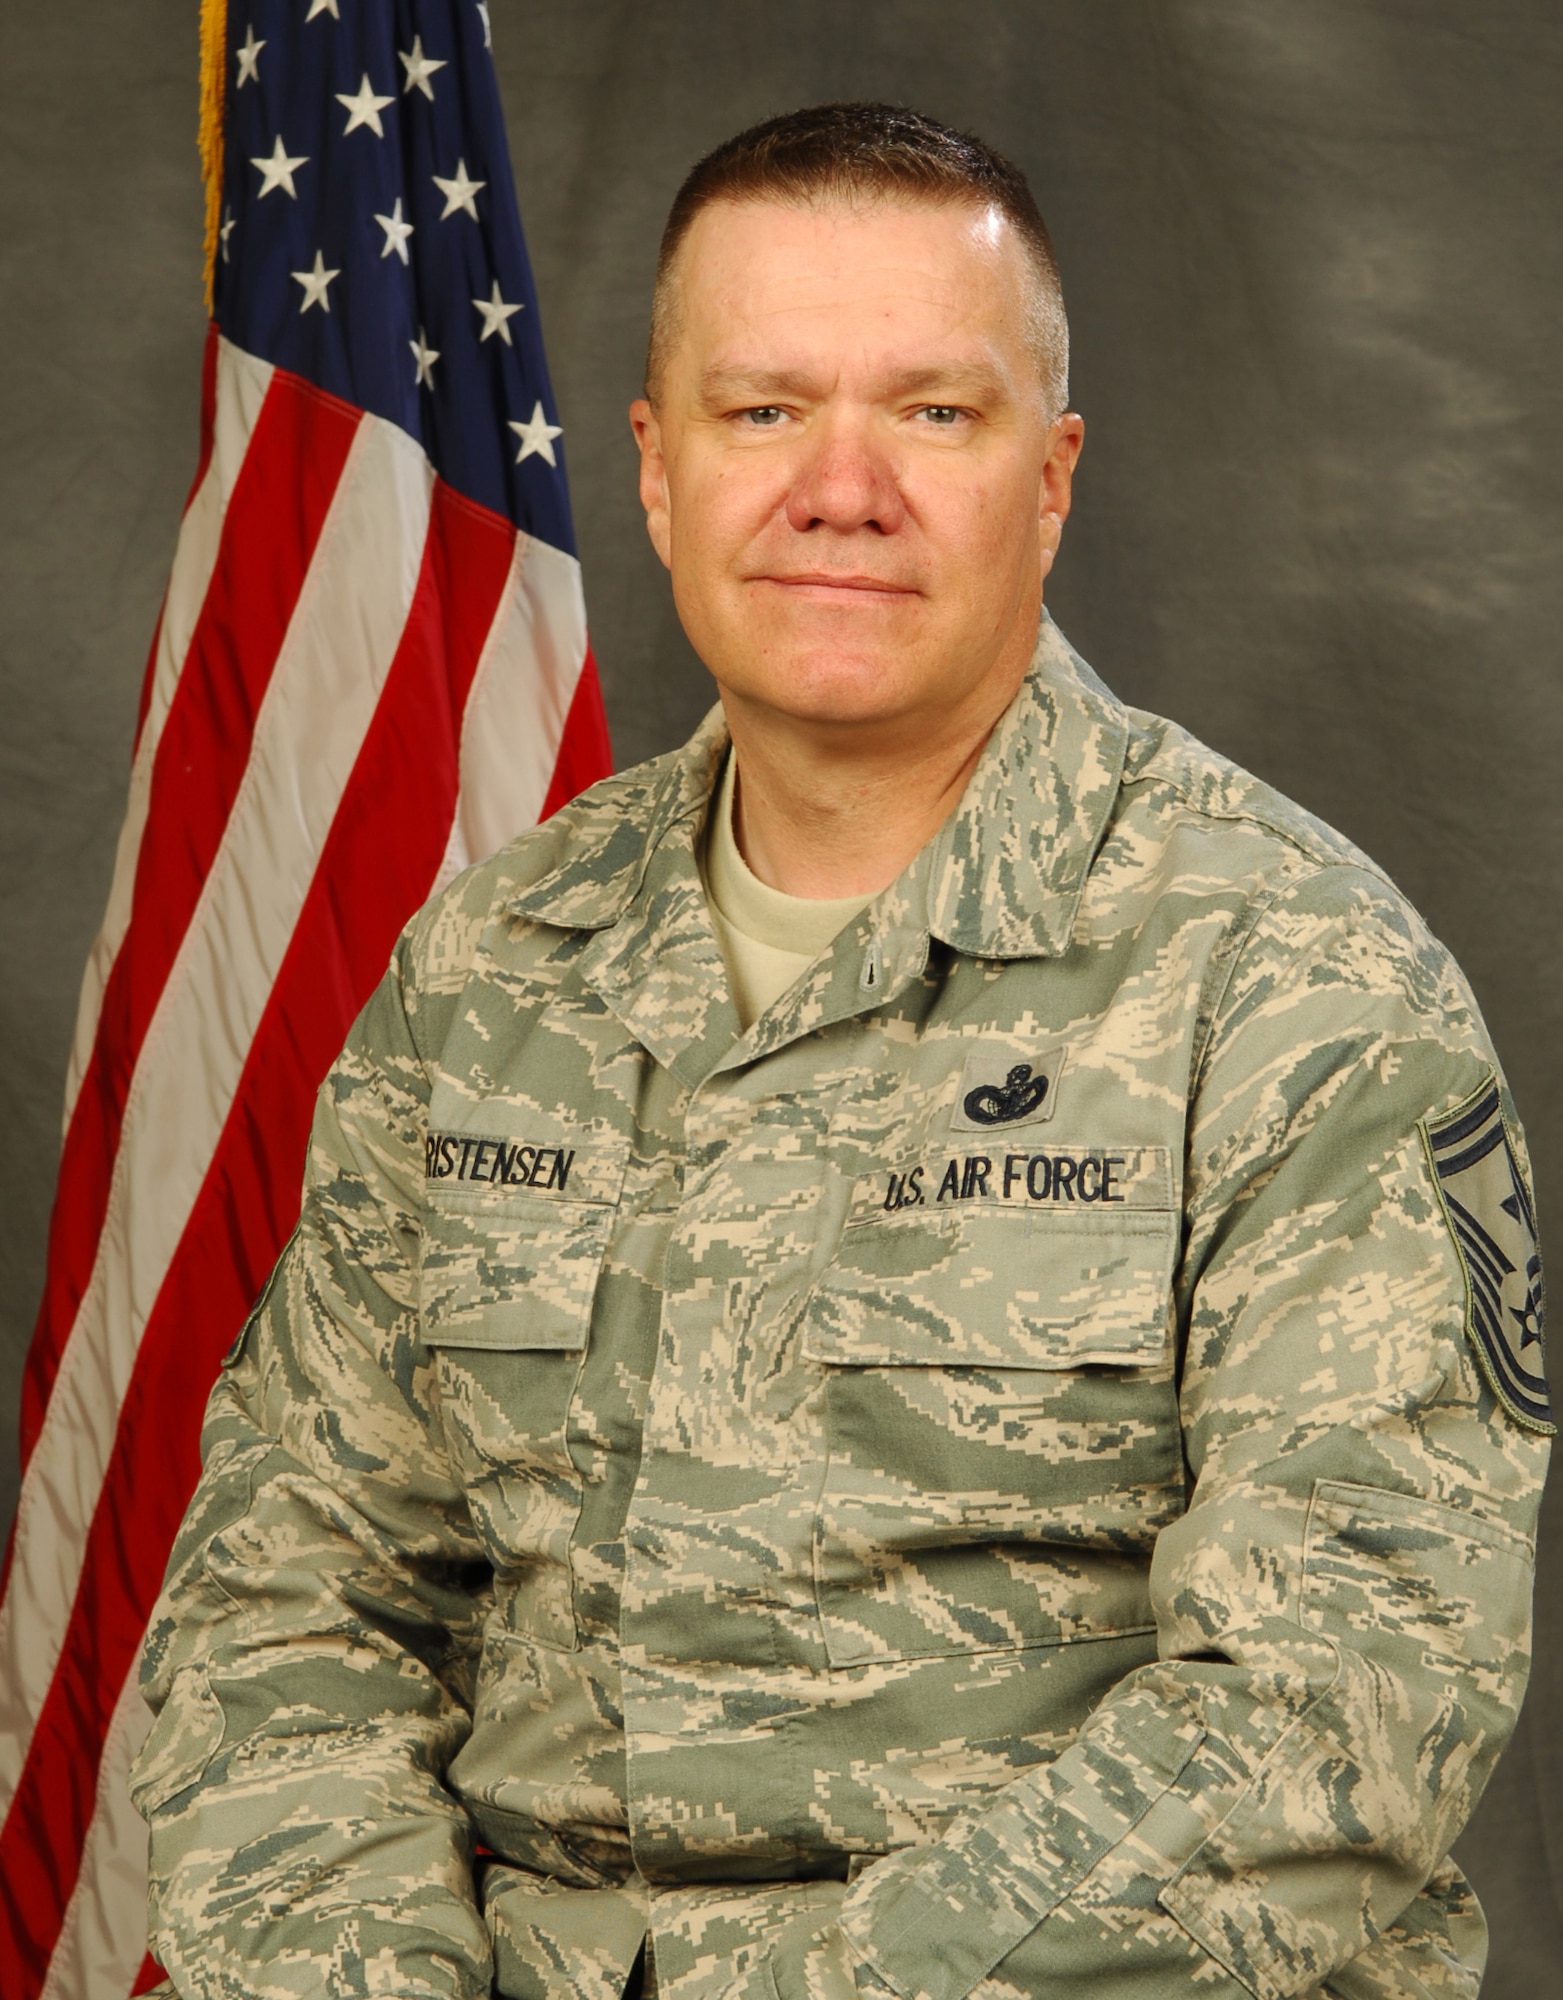 Senior Master Sgt. Dwight Christensen, 151st Air Refueling Wing first sergeant, poses for an official photo before his deployment to Iraq. U.S. Air Force photo by Tech. Sgt. Kelly Collett (RELEASED)